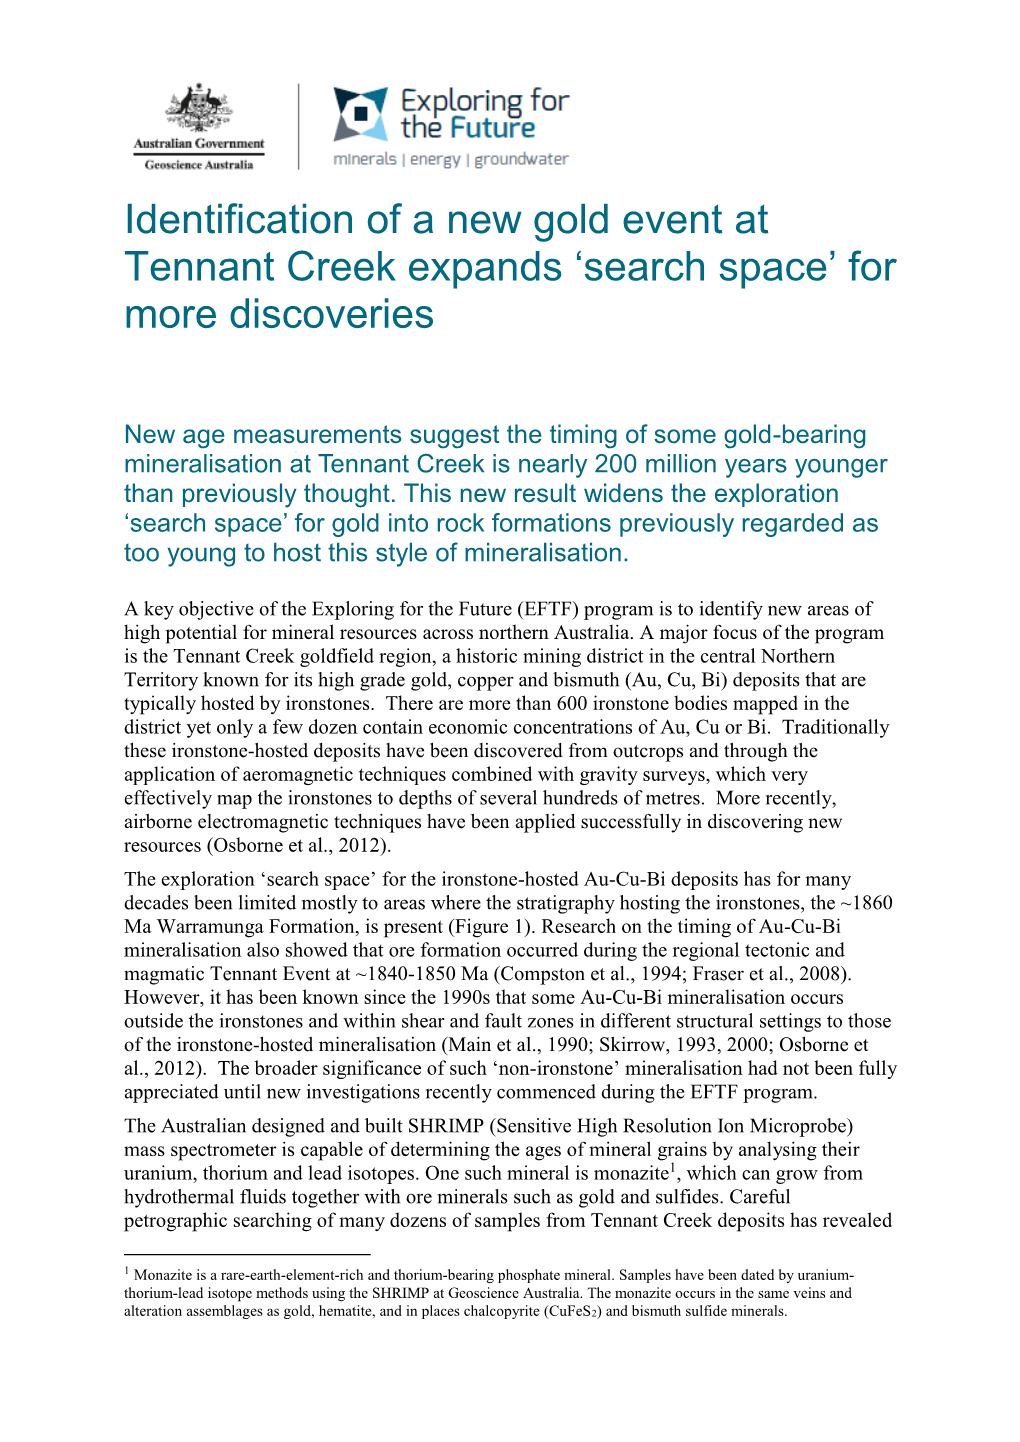 Identification of a New Gold Event at Tennant Creek Expands 'Search